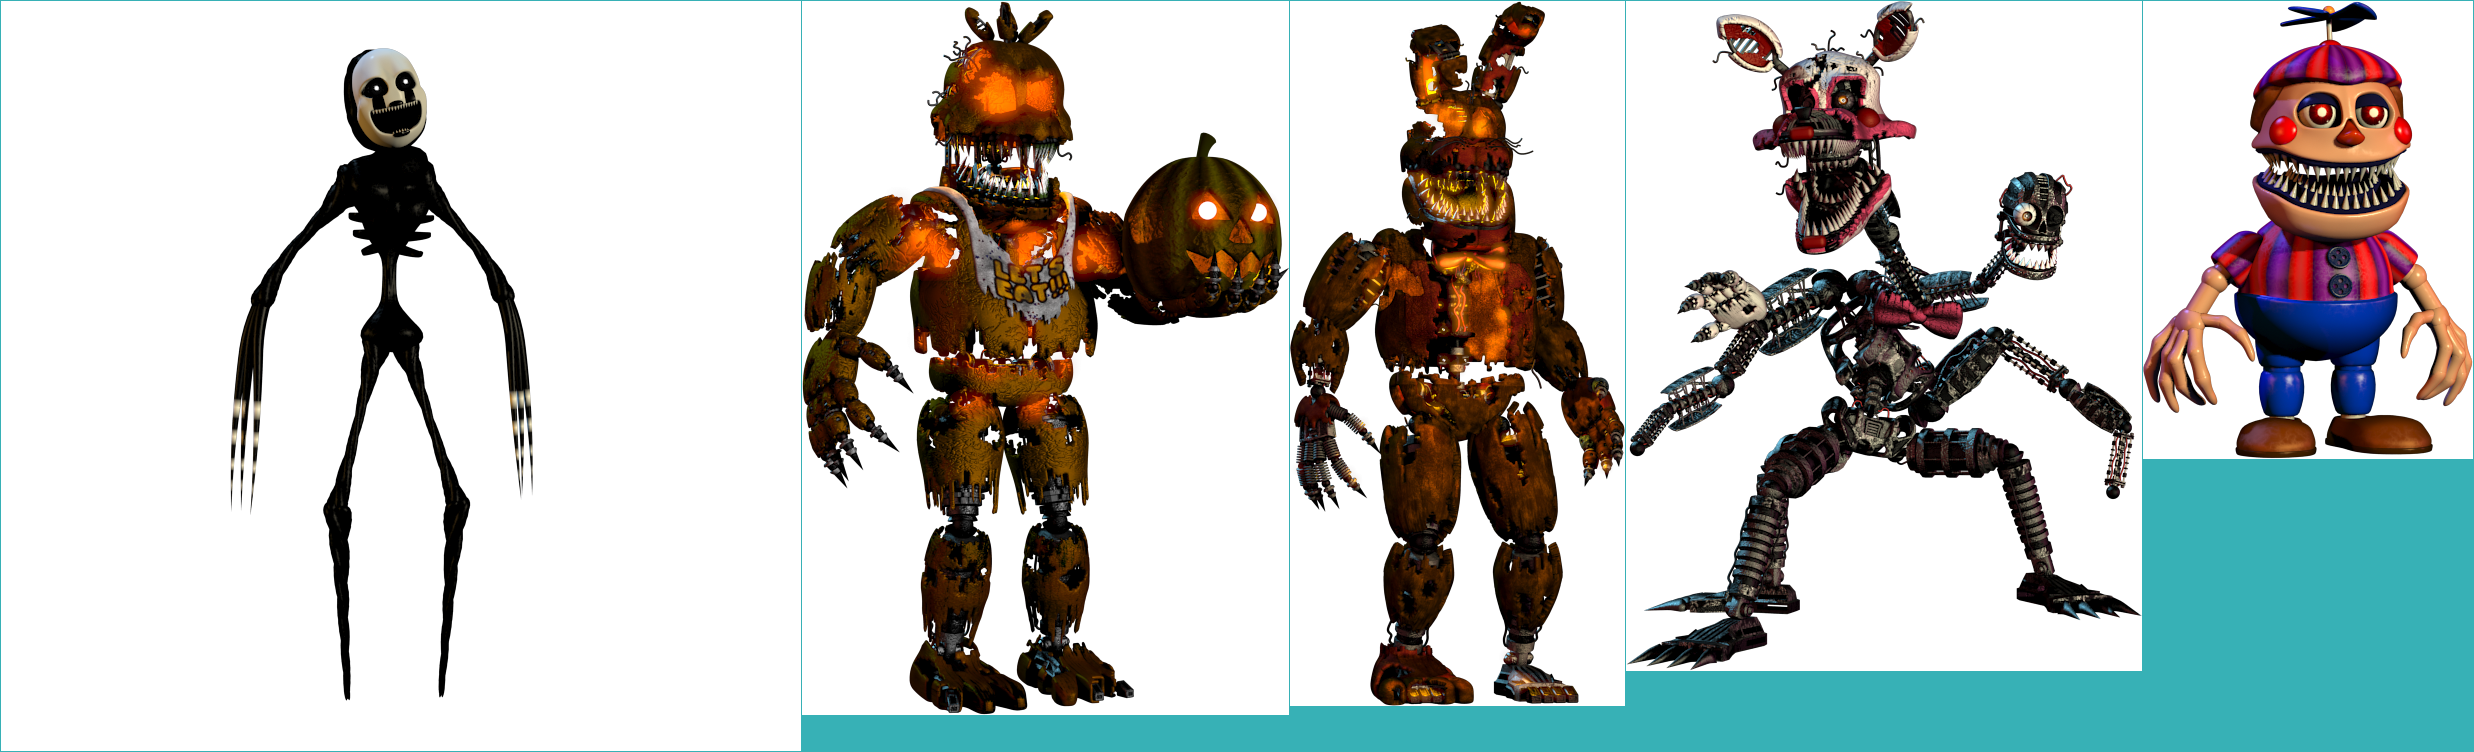 Five Nights At Freddy's 4: Halloween Edition PC Game - Free